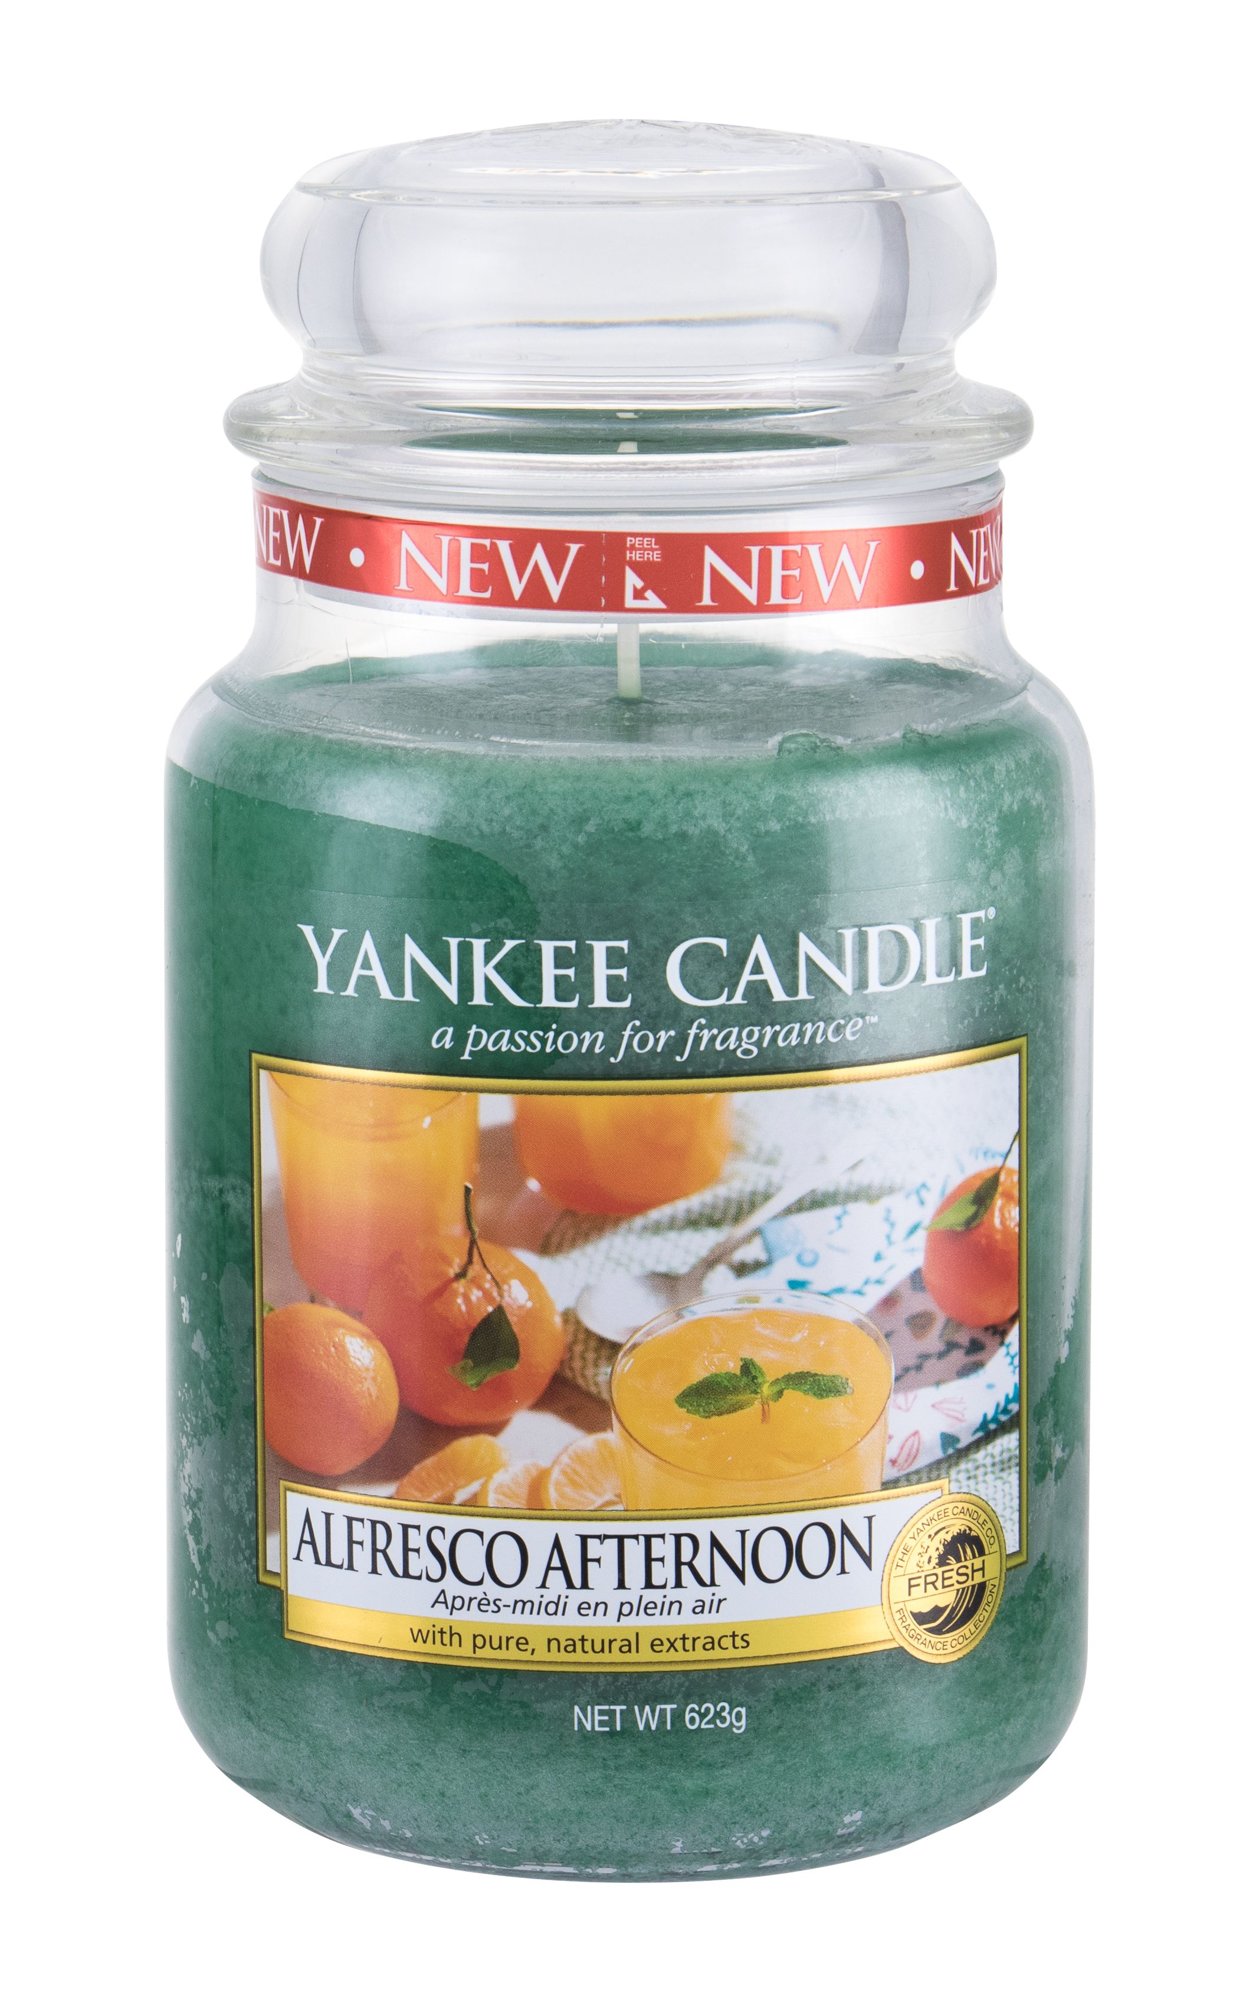 Yankee Candle Alfresco Afternoon